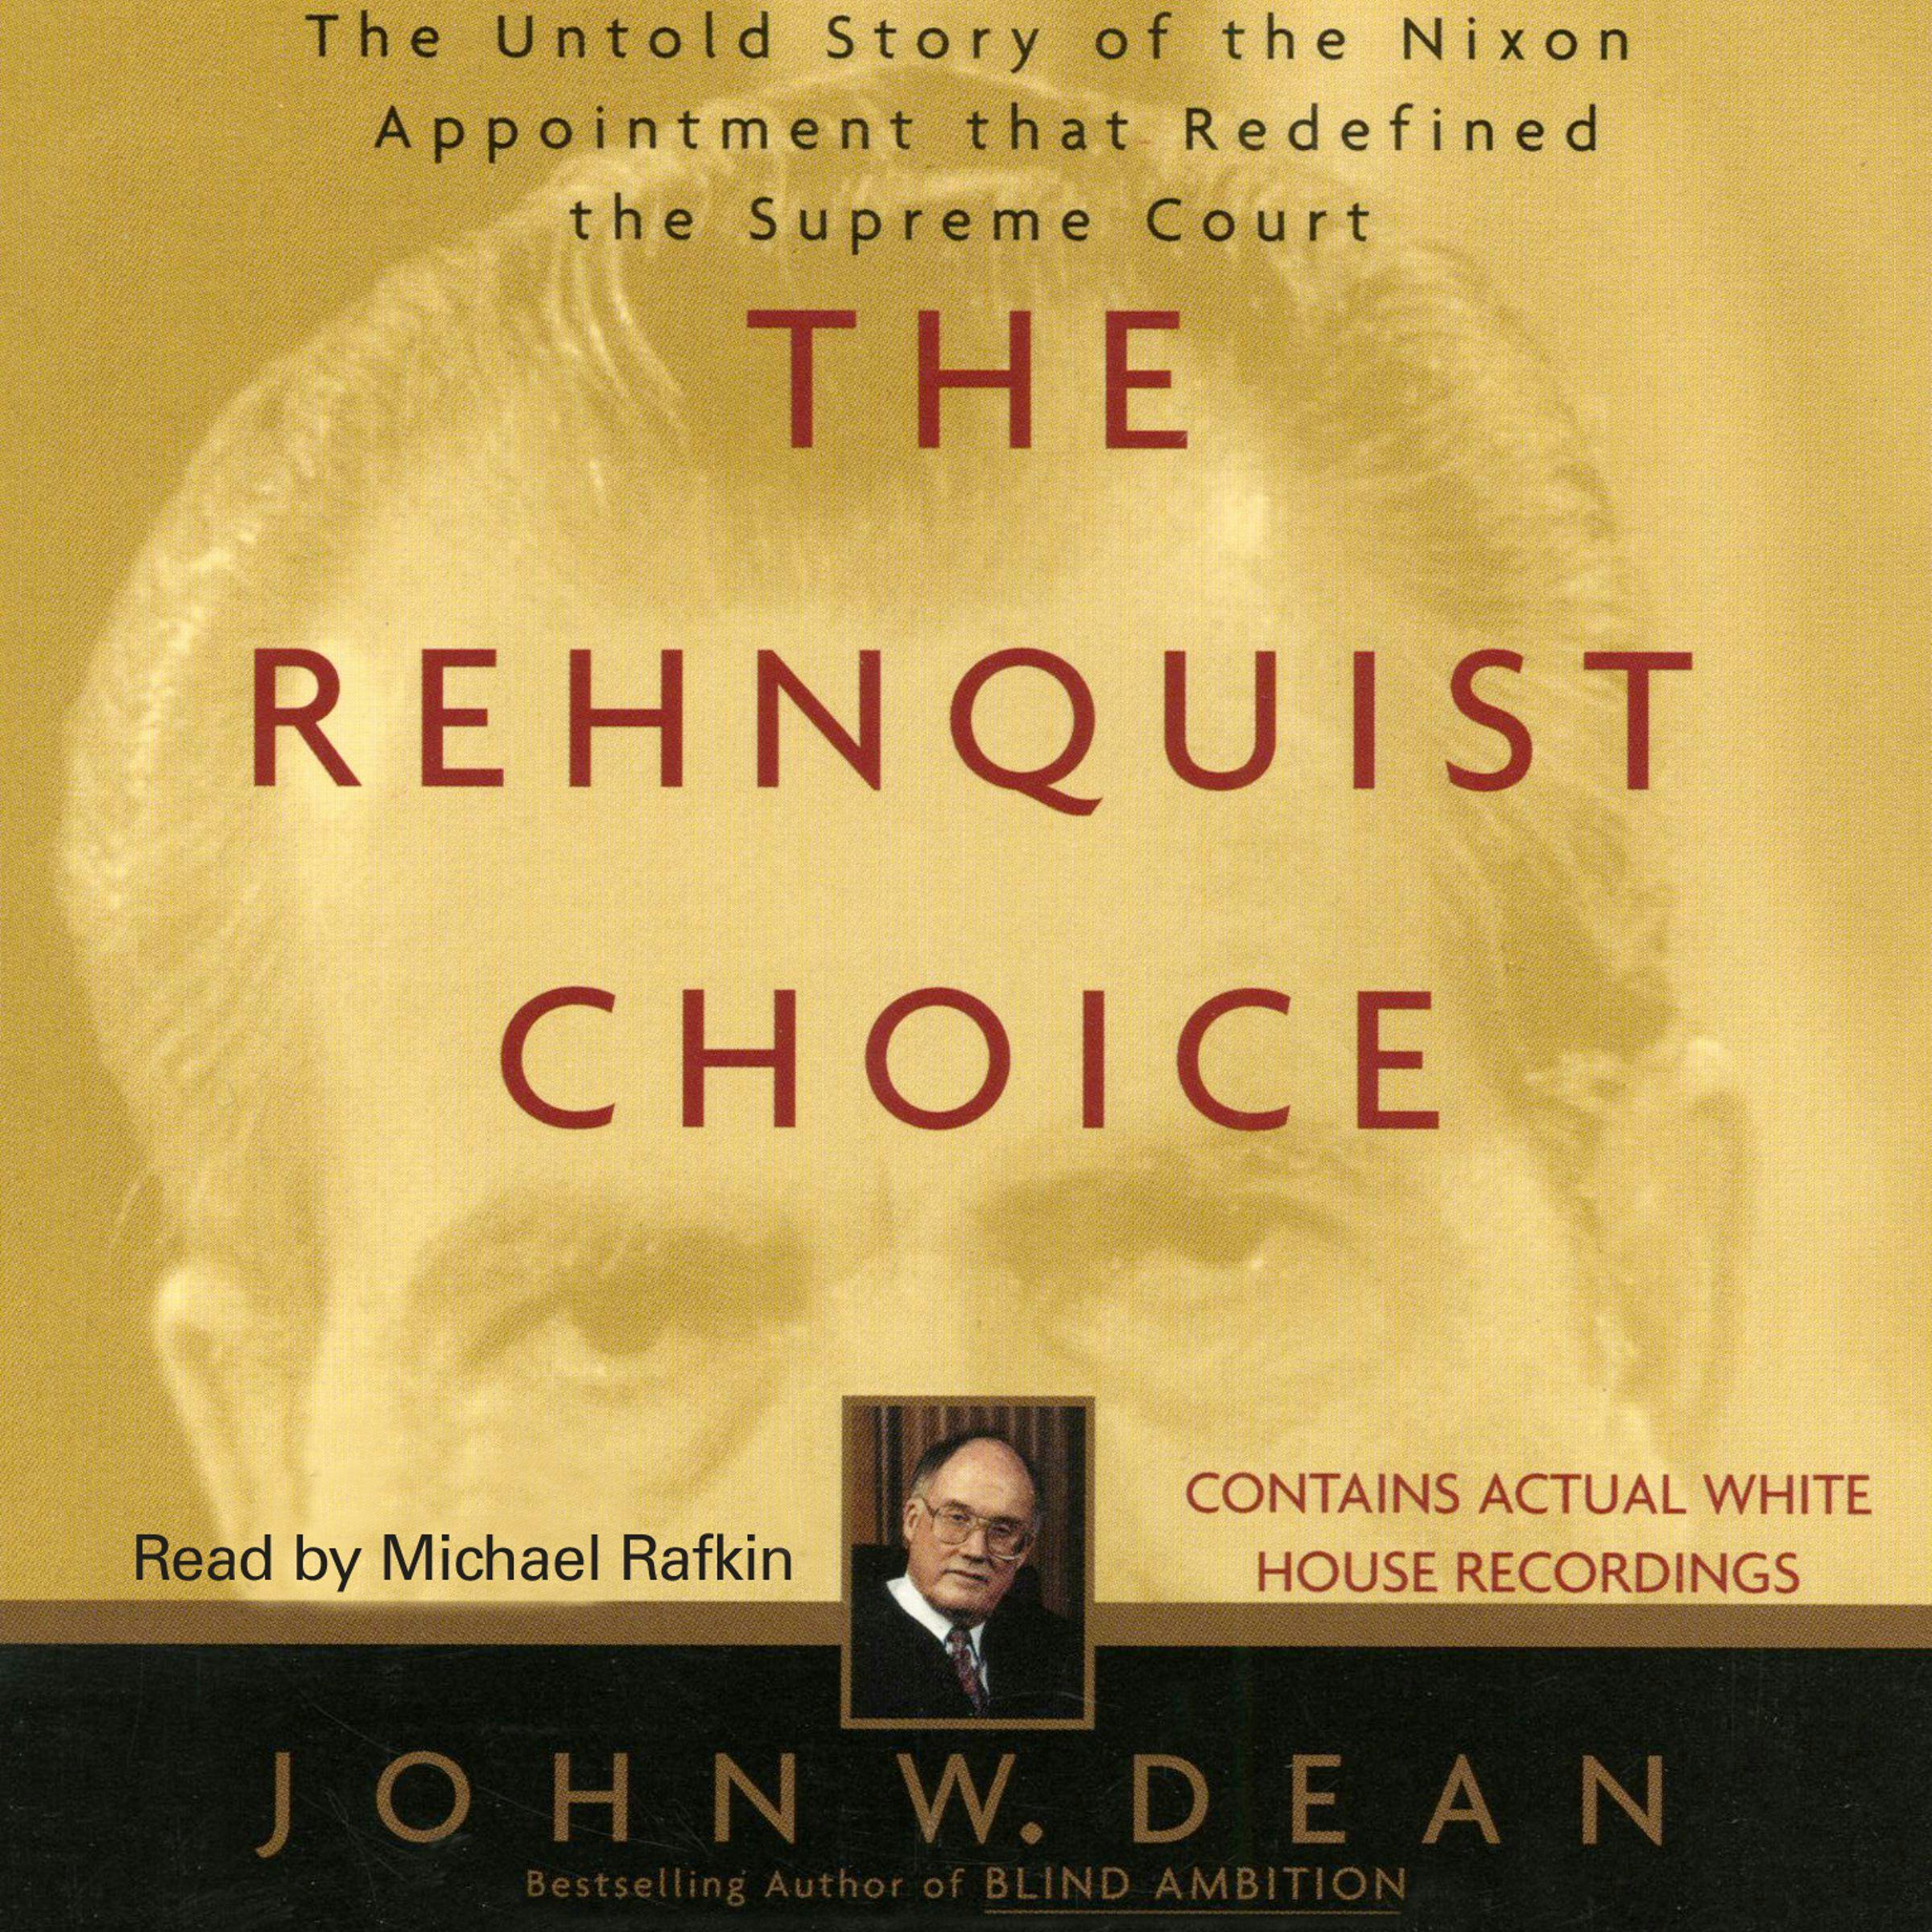 The Rehnquist Choice: The Untold Story of the Nixon Appointment that Red - undefined